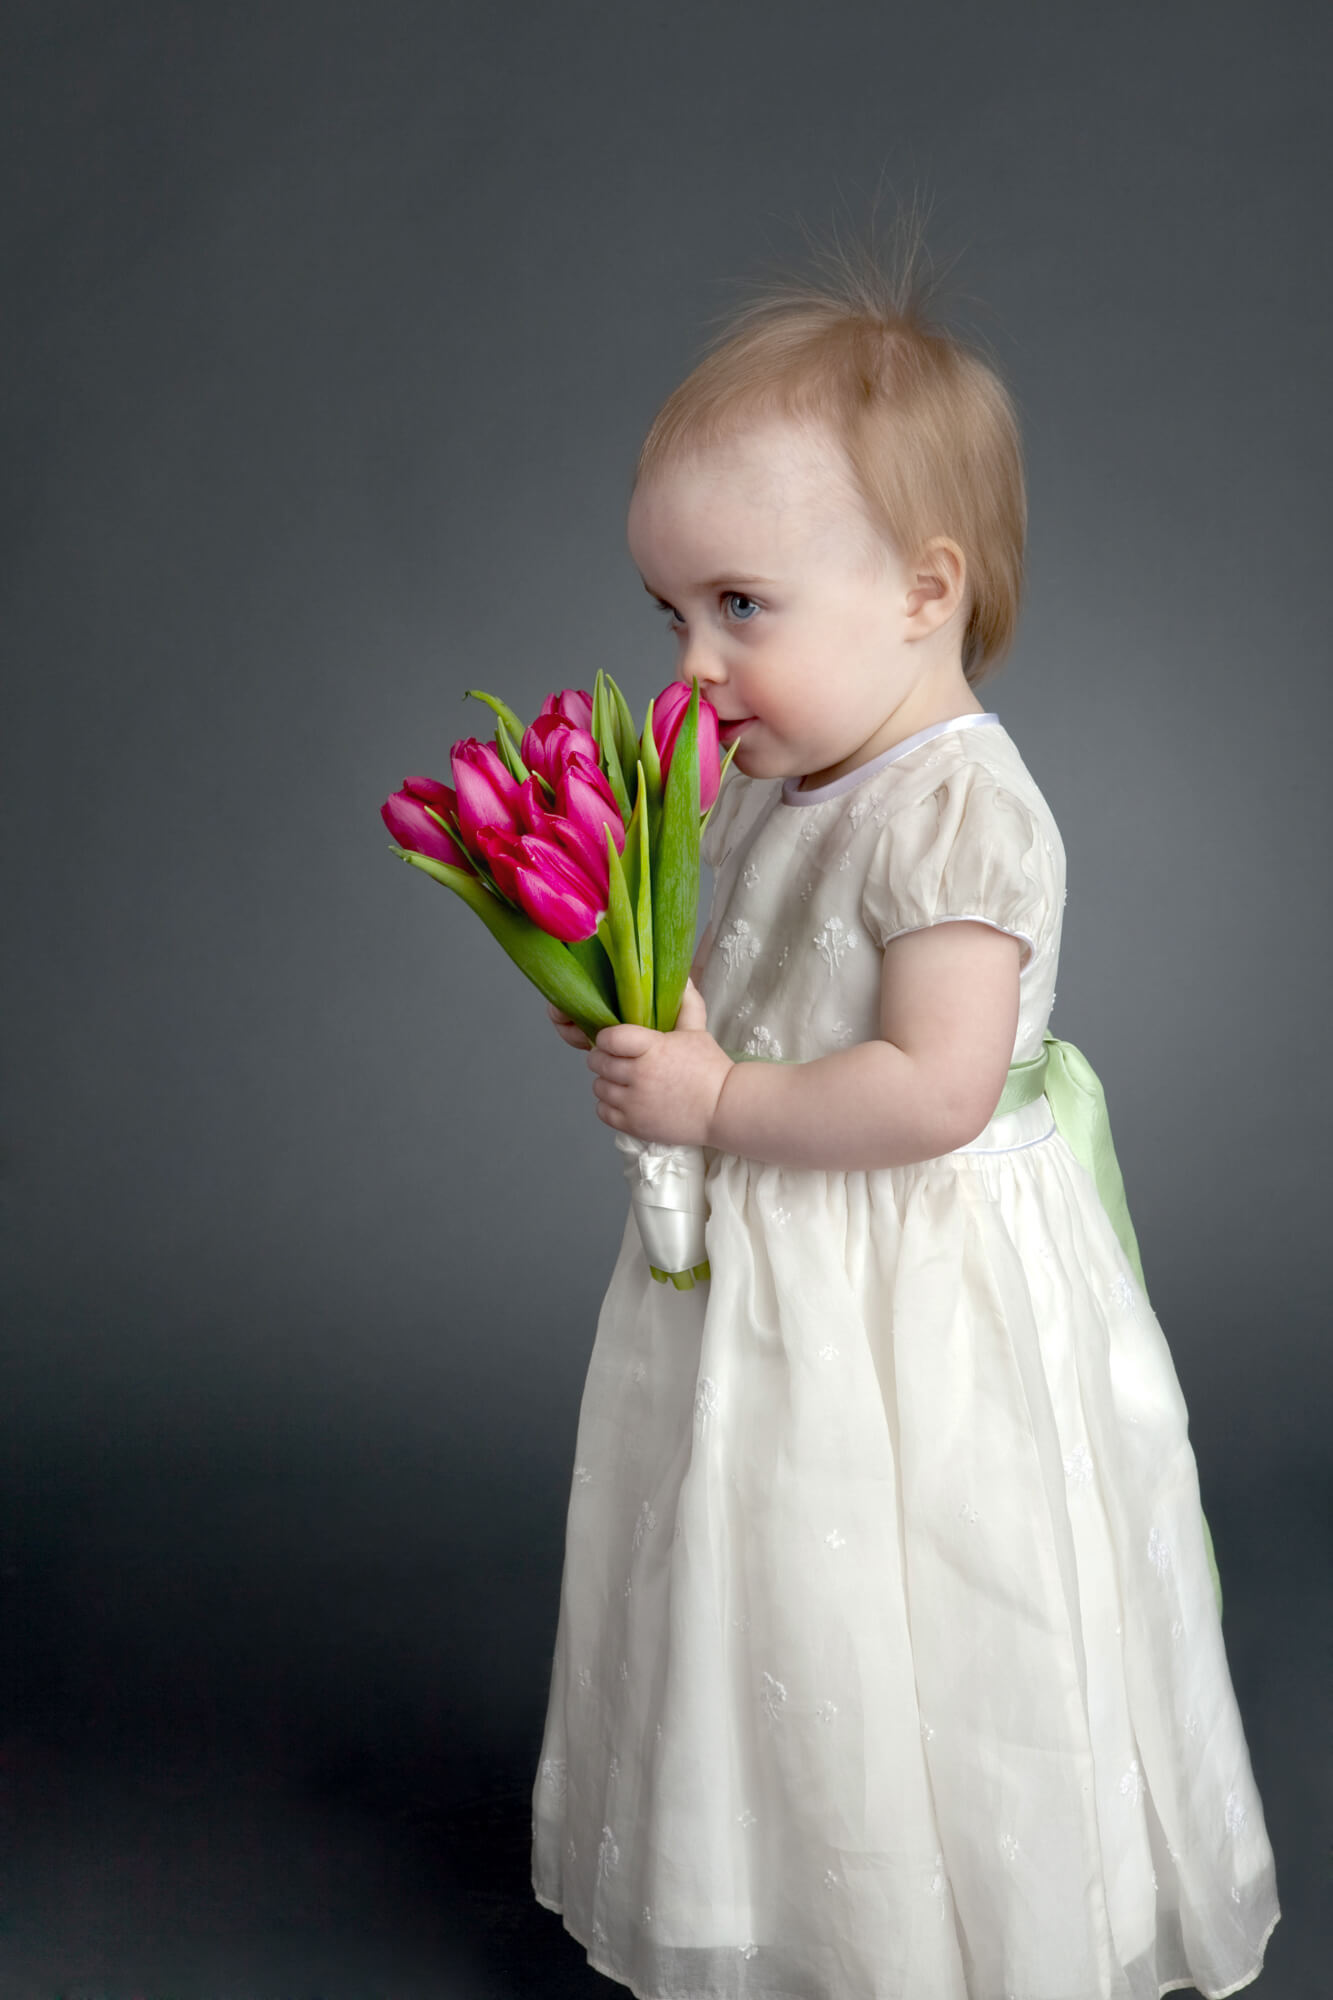 Young girl poses with tulips during portrait session